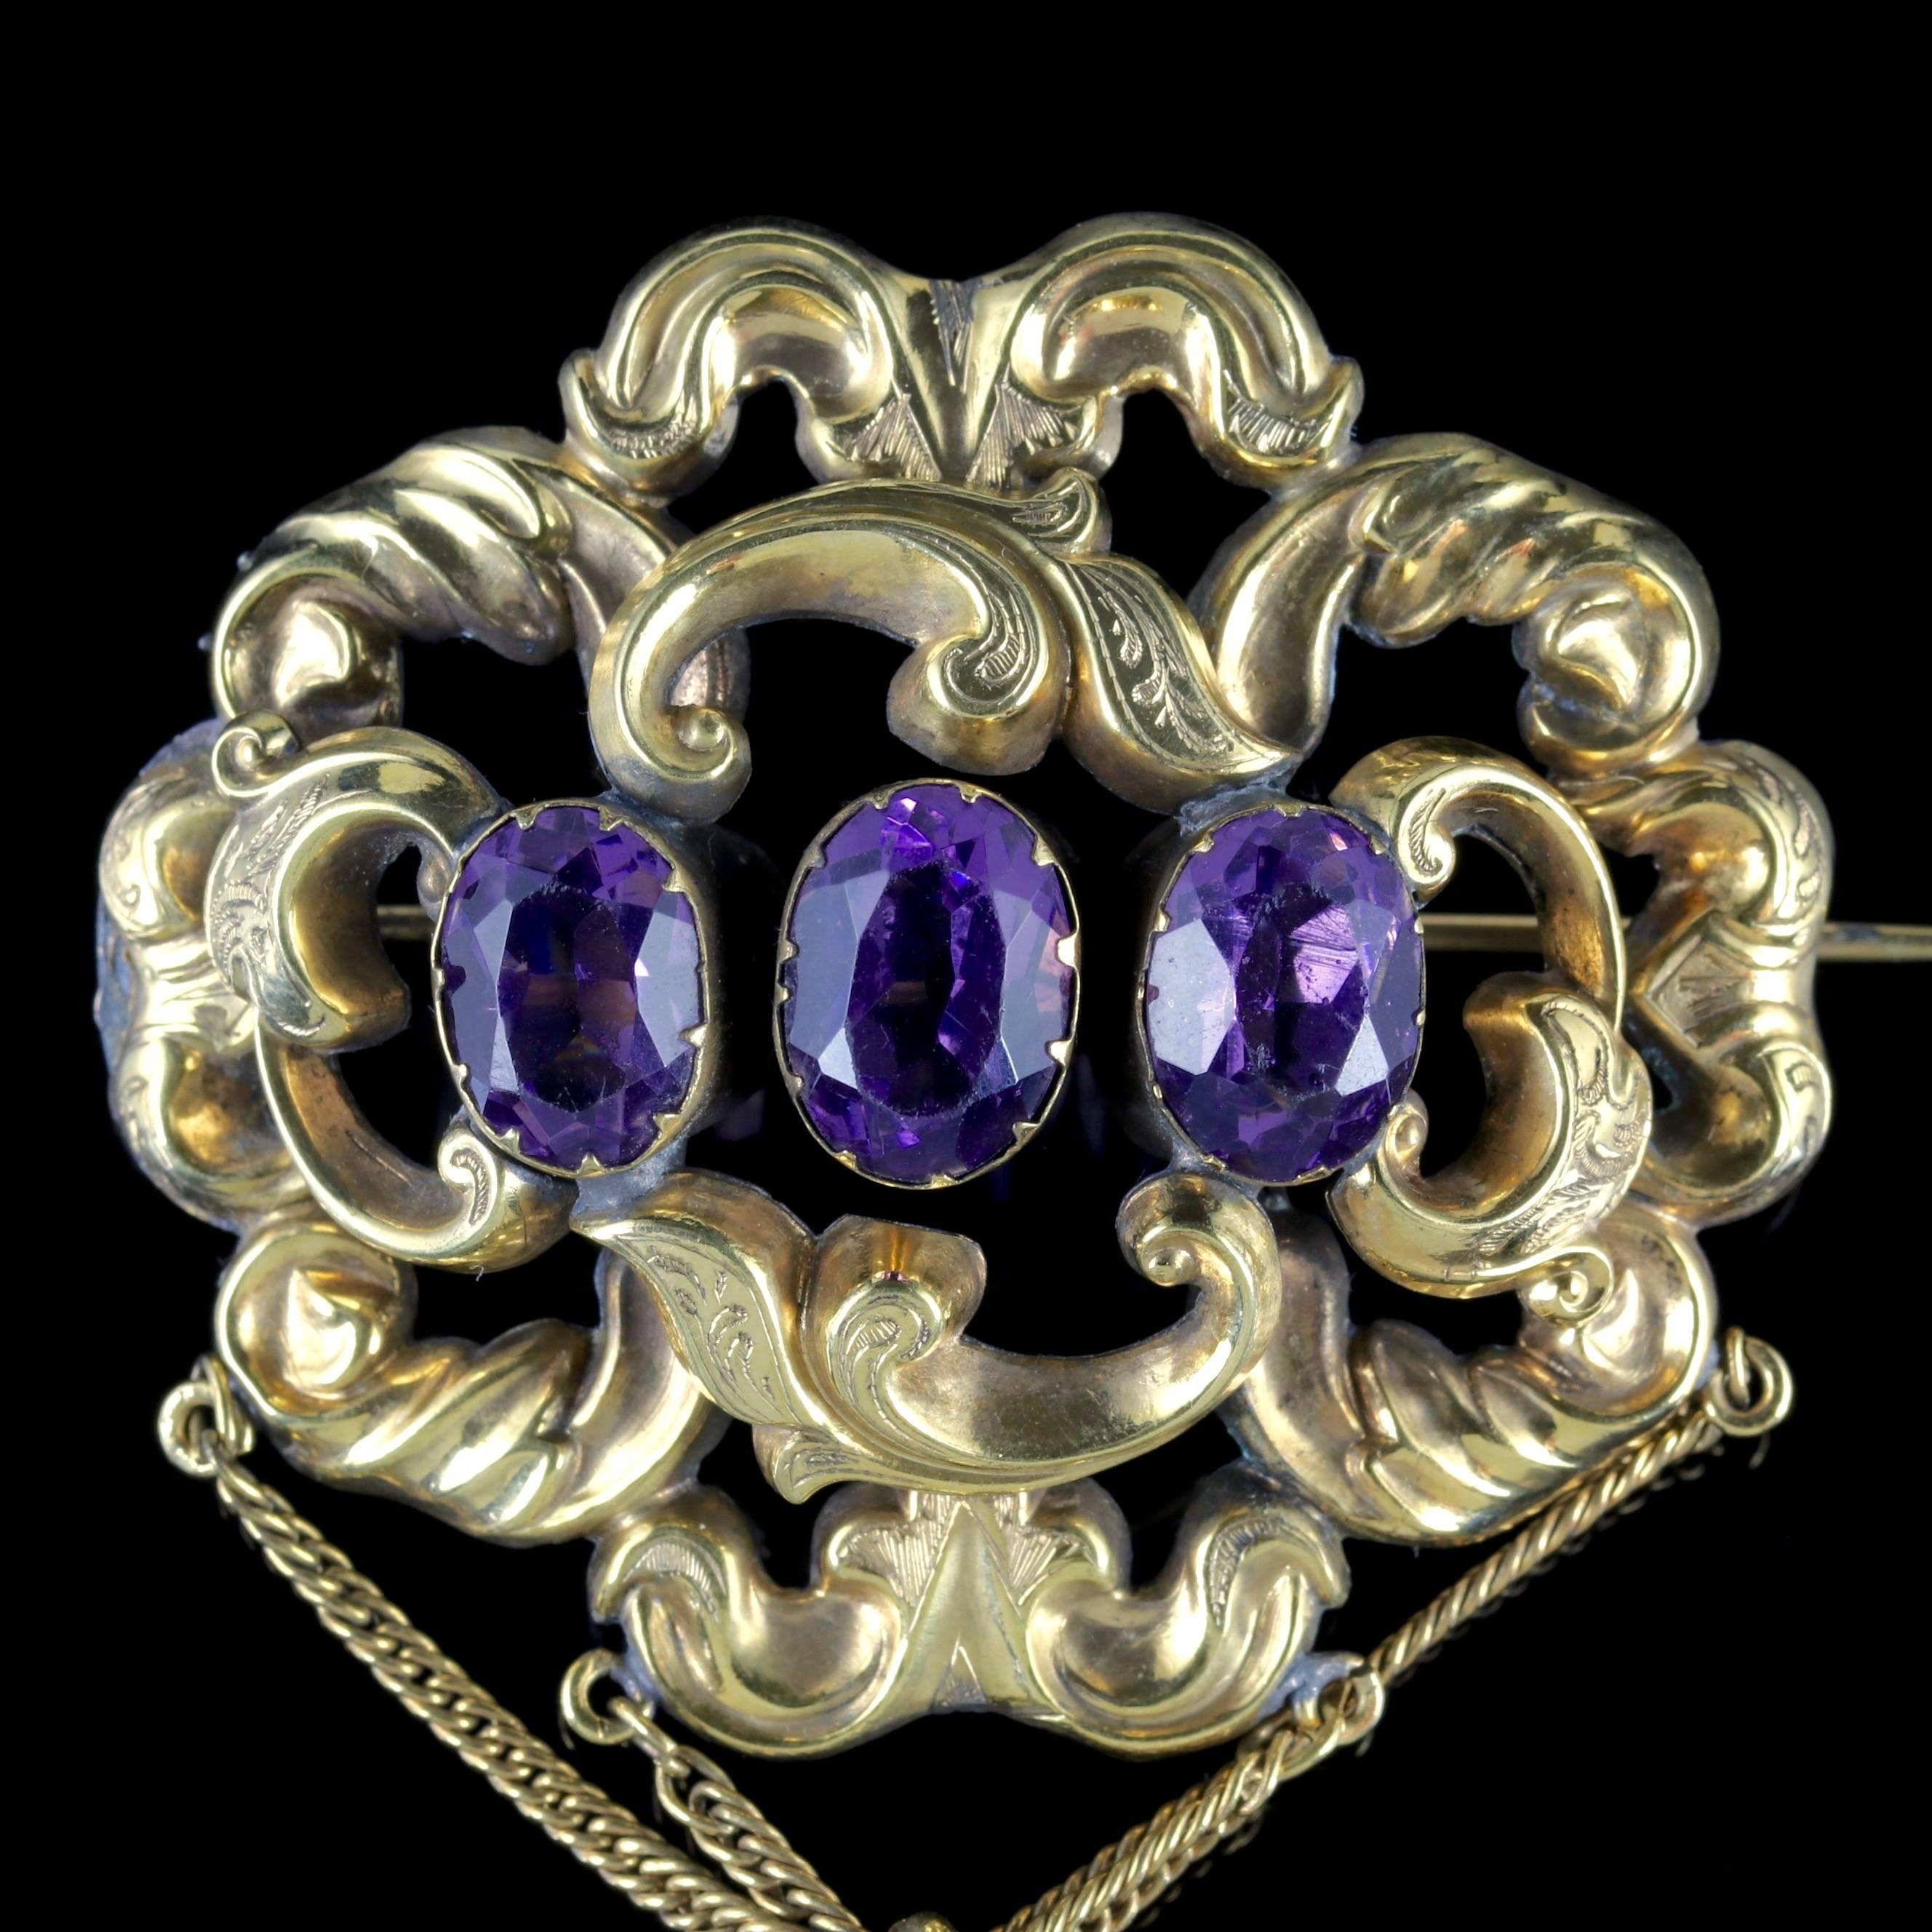 This magnificent antique Paste Stone dropper brooch is Victorian Circa 1900. 

The grand piece boasts decorative engraved workmanship with three purple Paste Stones running across the central gallery. 

Paste is a heavy, transparent flint glass that